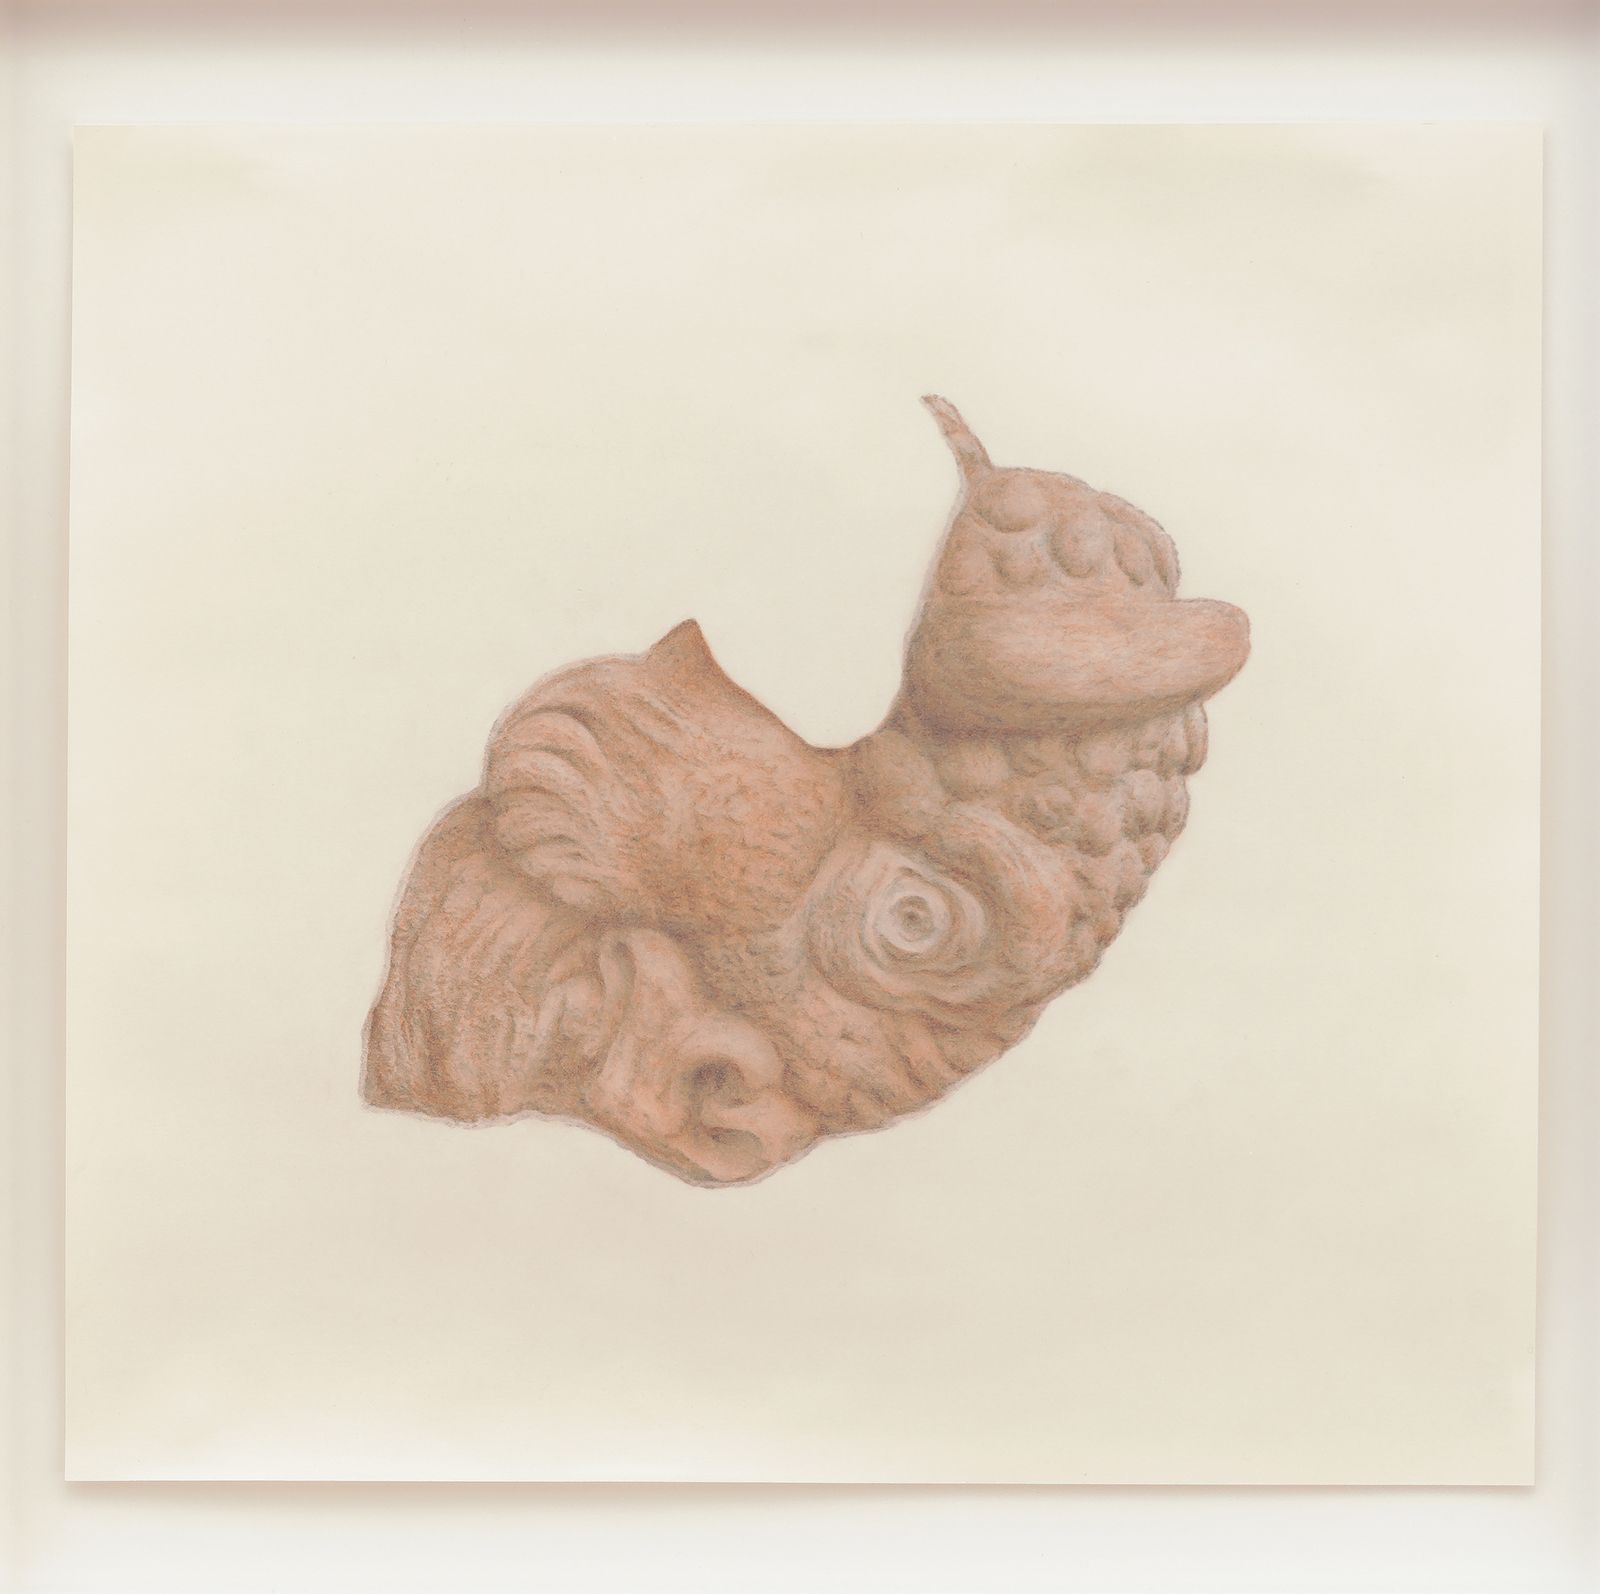 Michael Wang, UNTITLED FRAGMENT (WISENTDENKMAL), 2012, graphite and red bole on paper, 16 × 18 in.